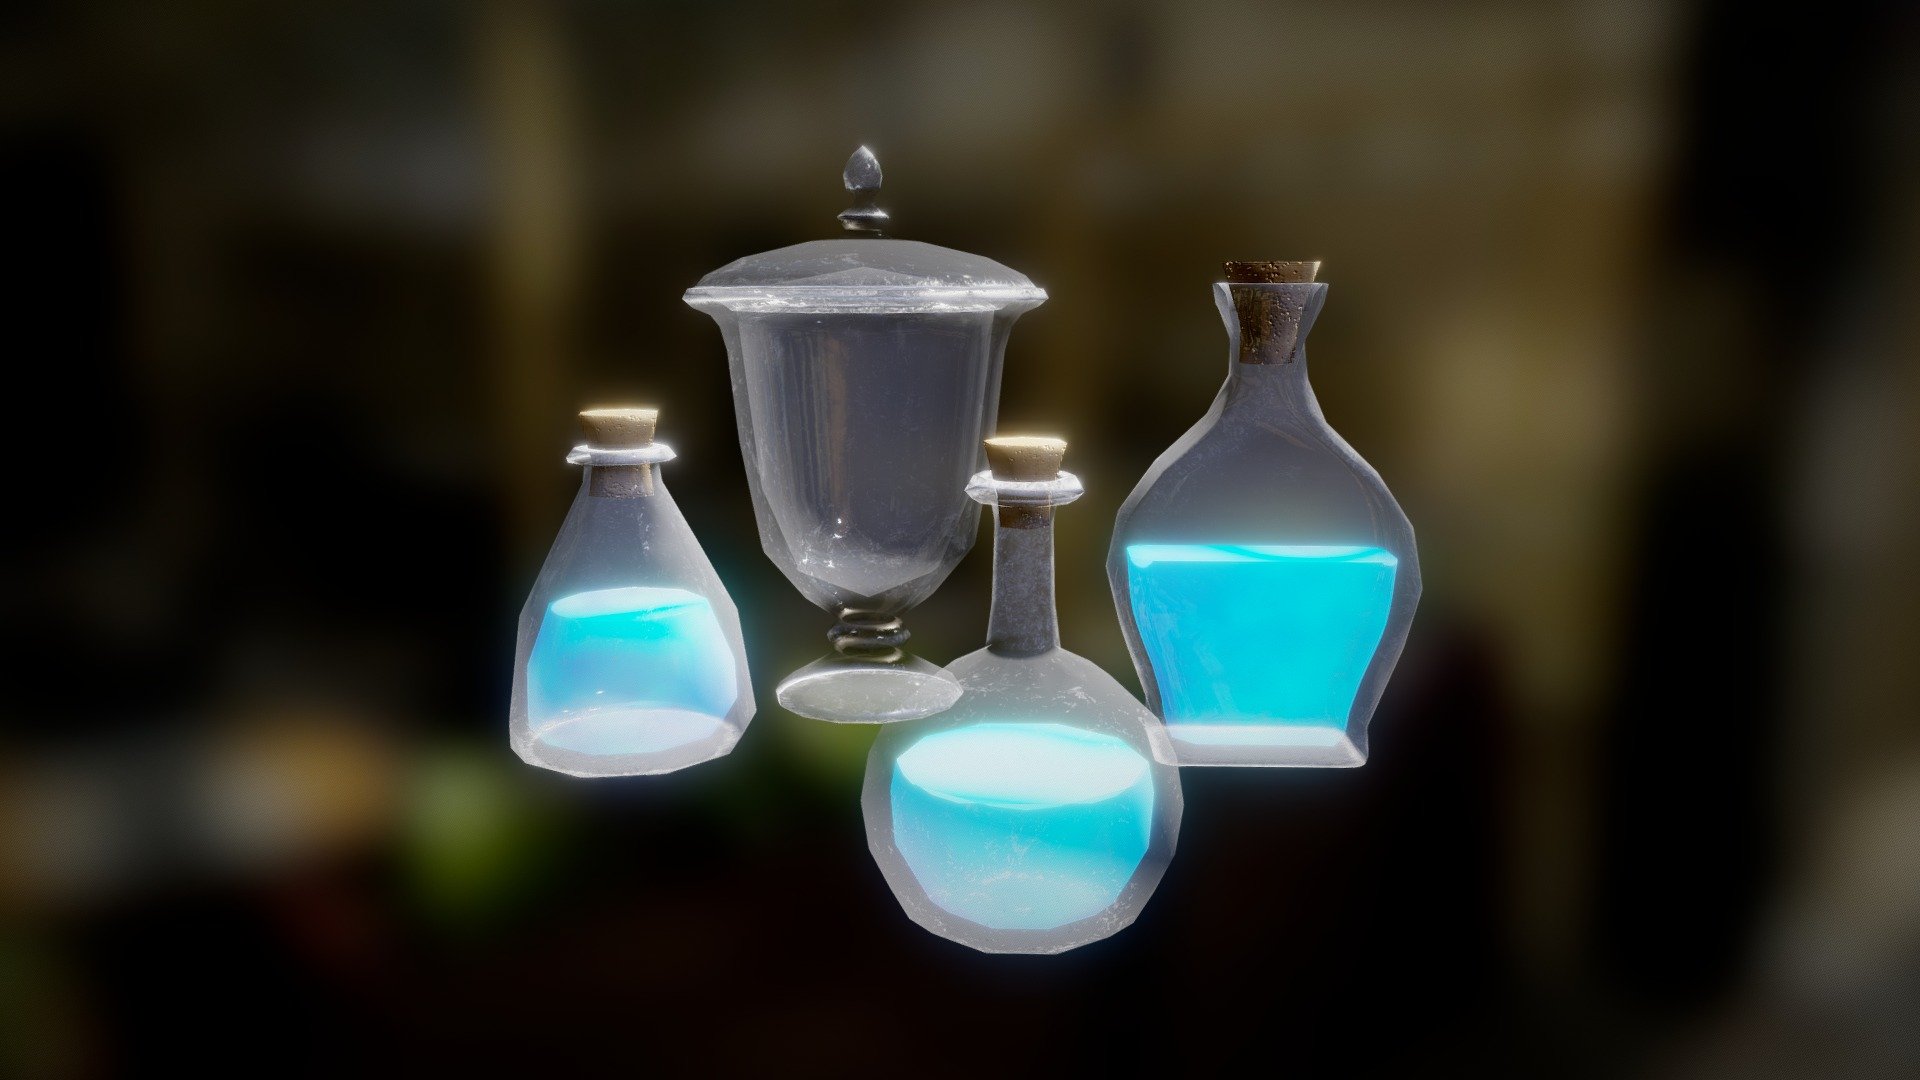 Potions, glass bottles, jars. Just some low poly scene props 3d model